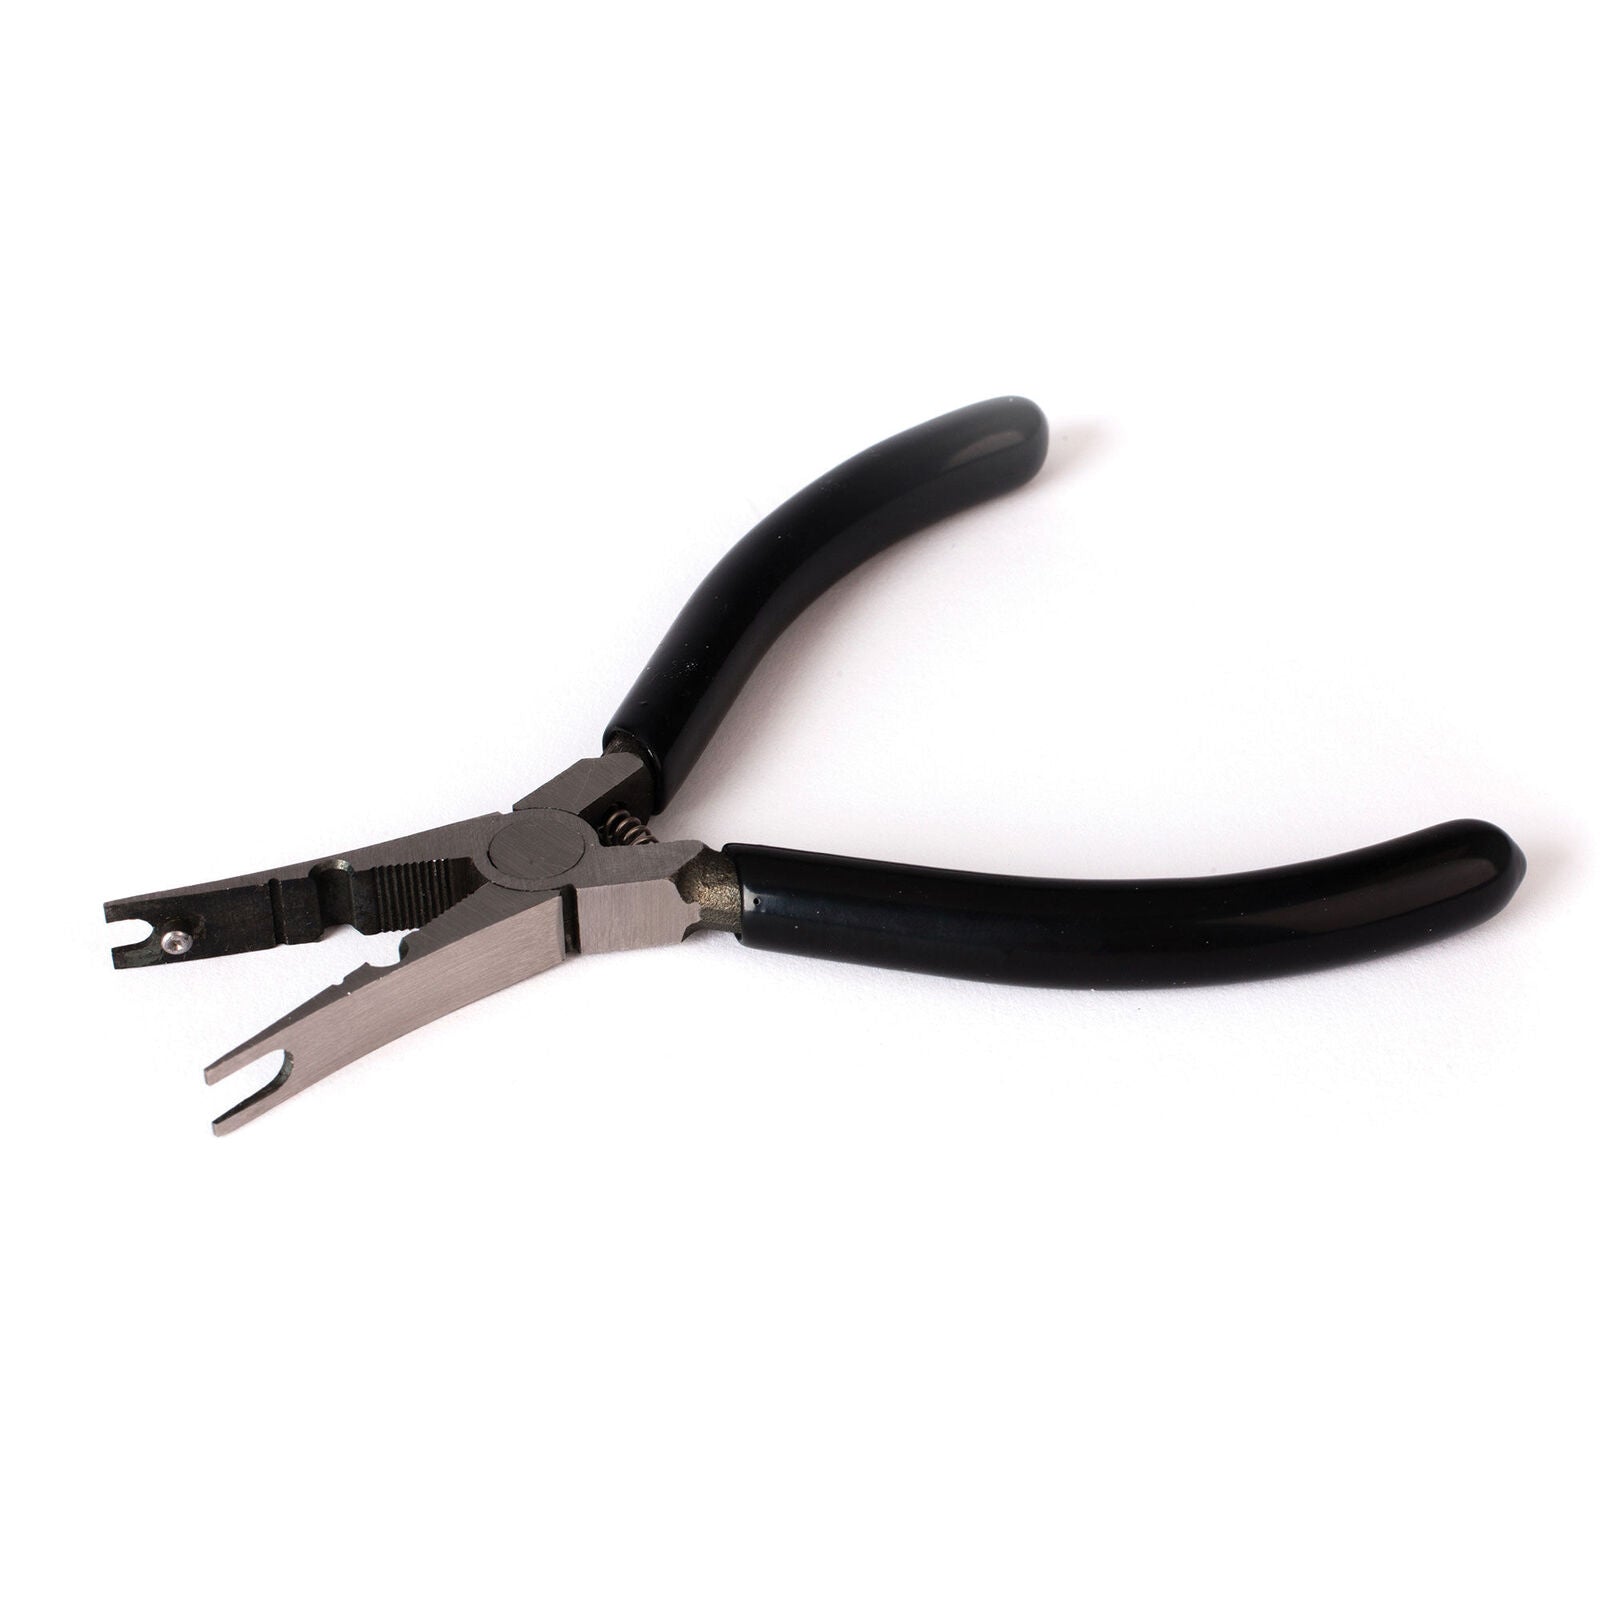 EFLITE BLADE BLH100 Deluxe Ball Link Pliers: All